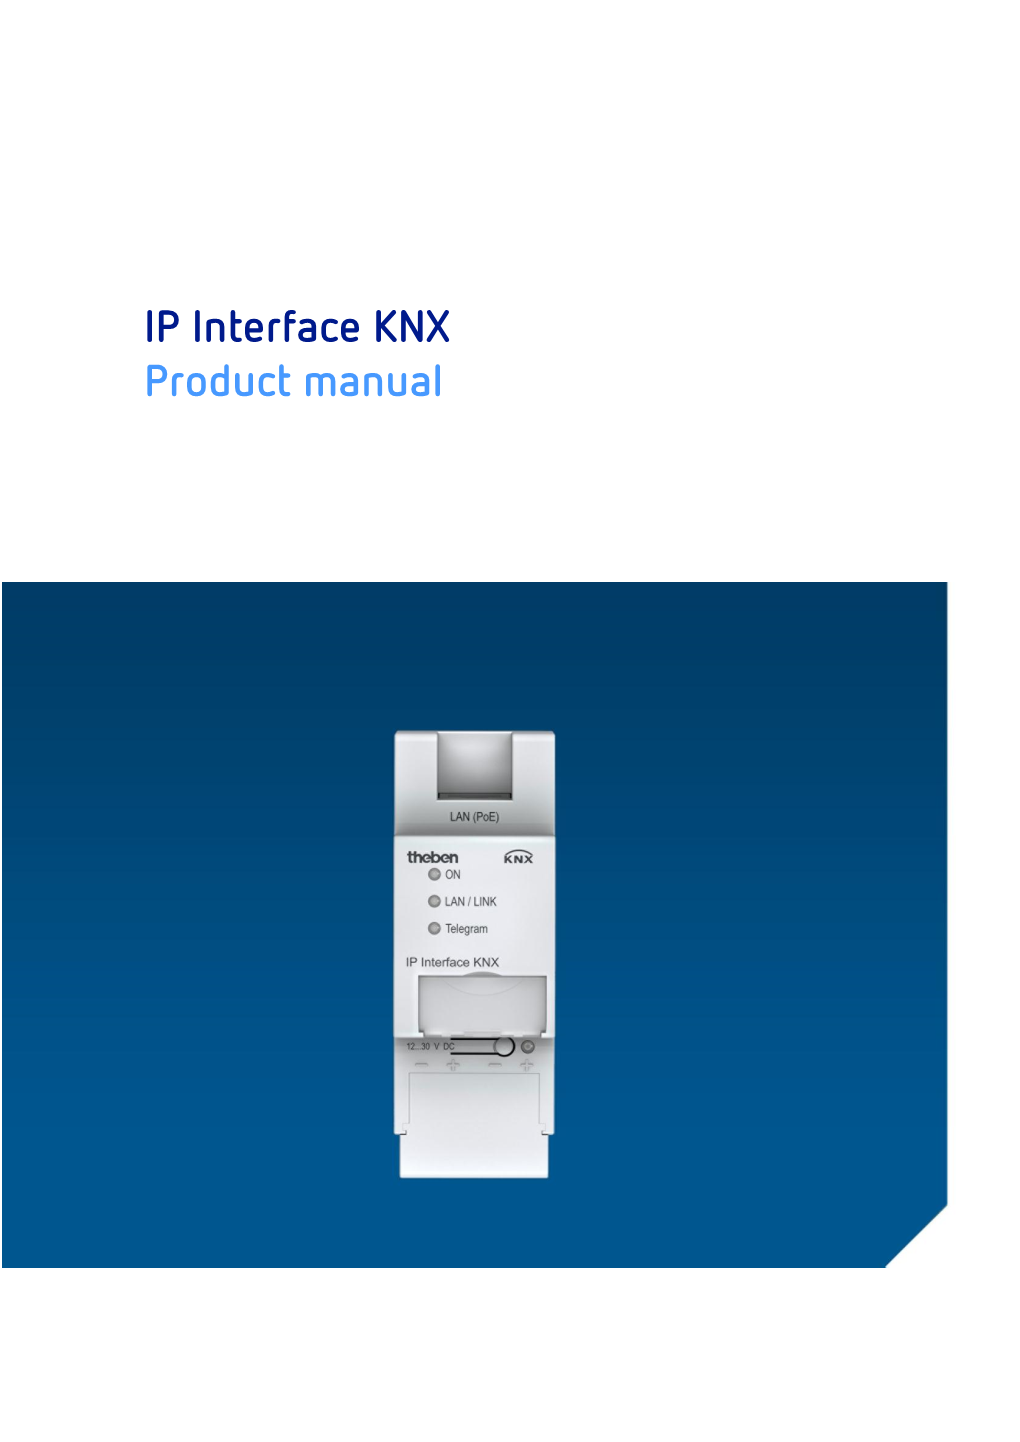 IP Interface KNX Product Manual